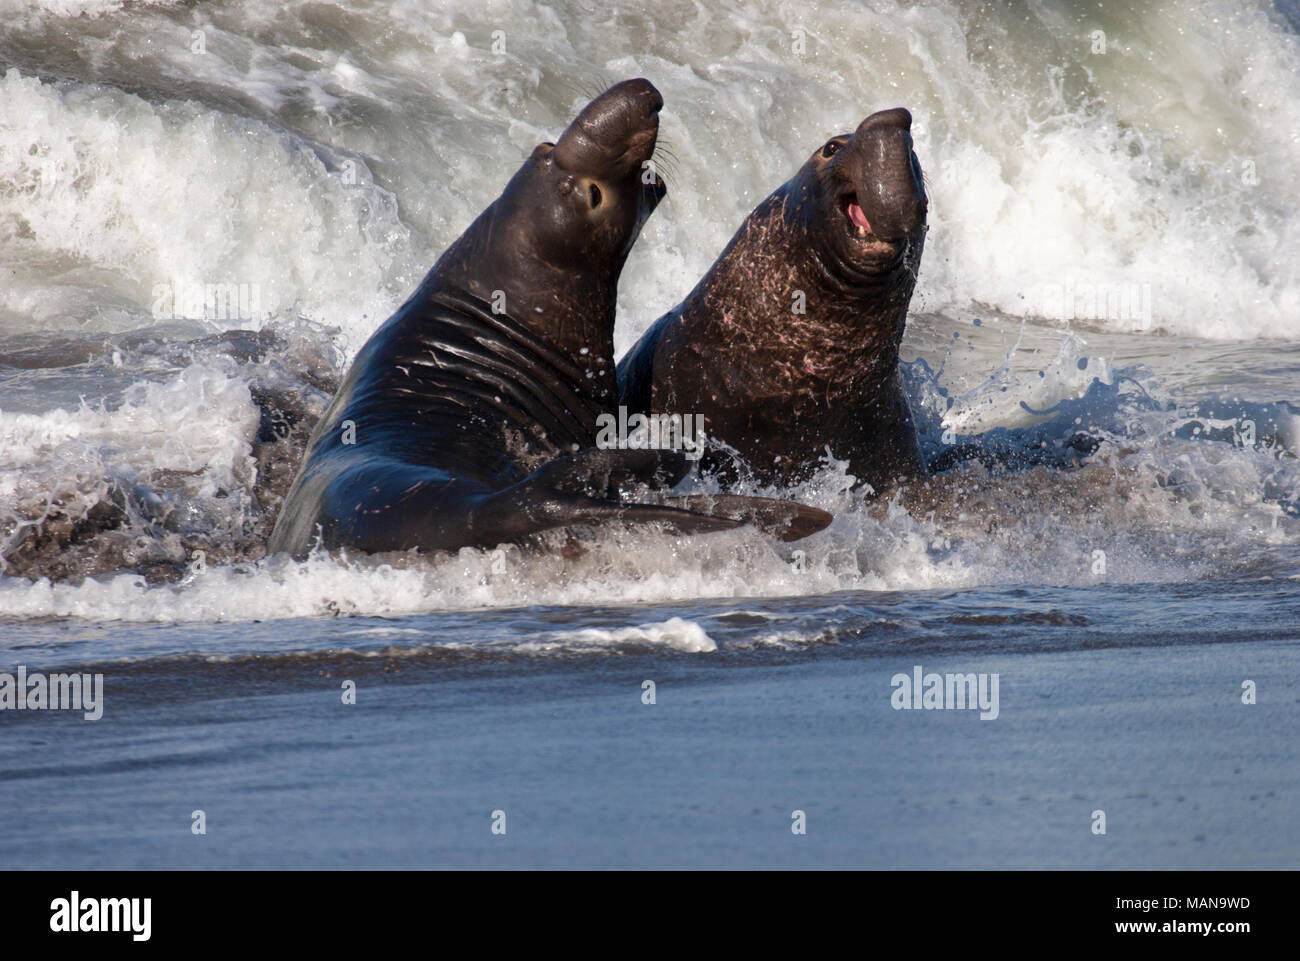 Northern Elephant Seal males (Mirounga angustirostris) fighting in surf on Pacific Ocean shore Stock Photo